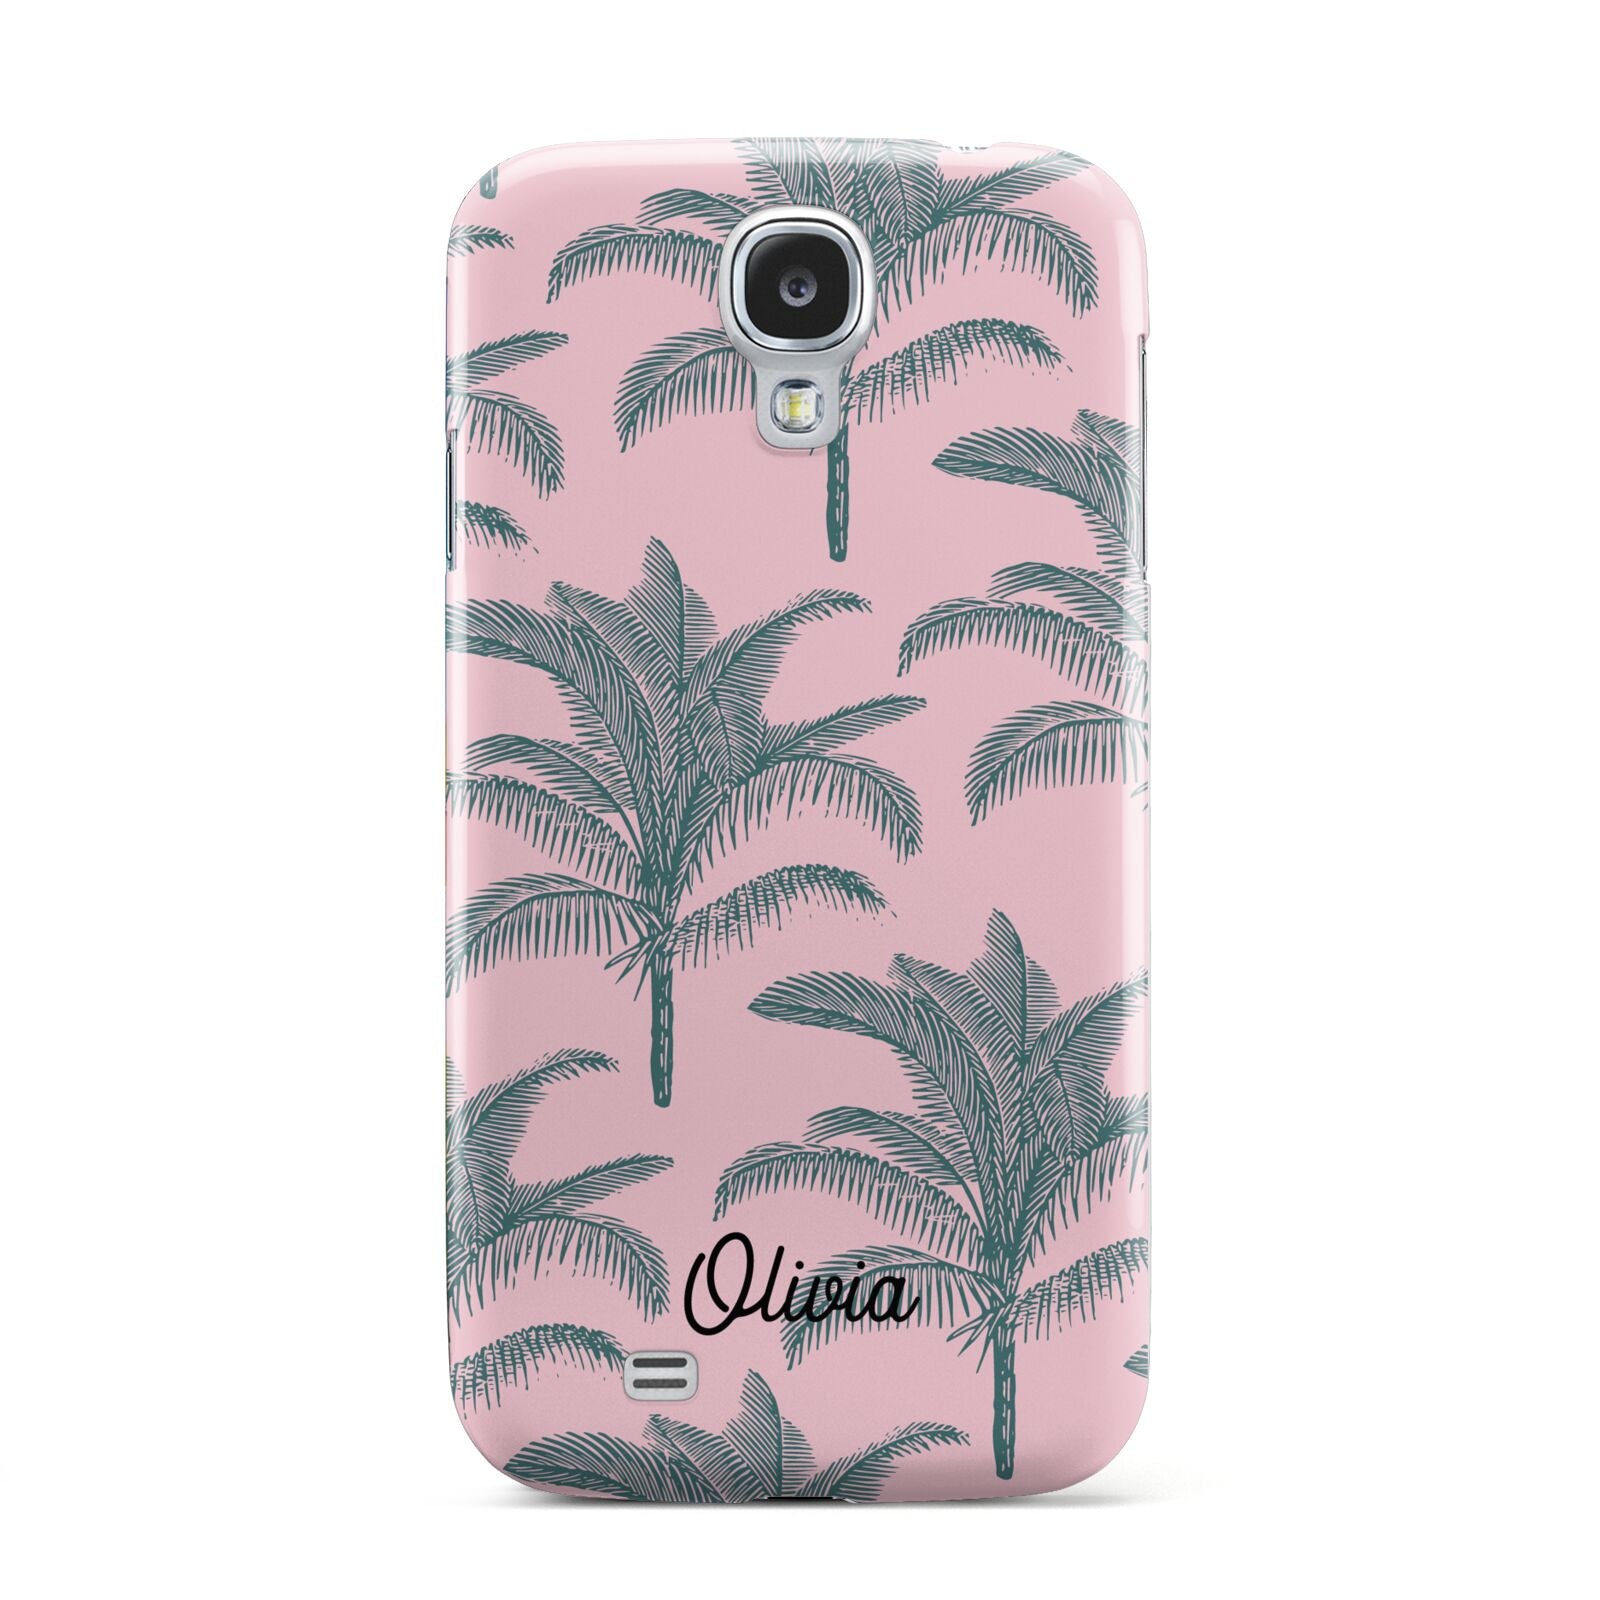 Personalised Palm Samsung Galaxy S4 Case